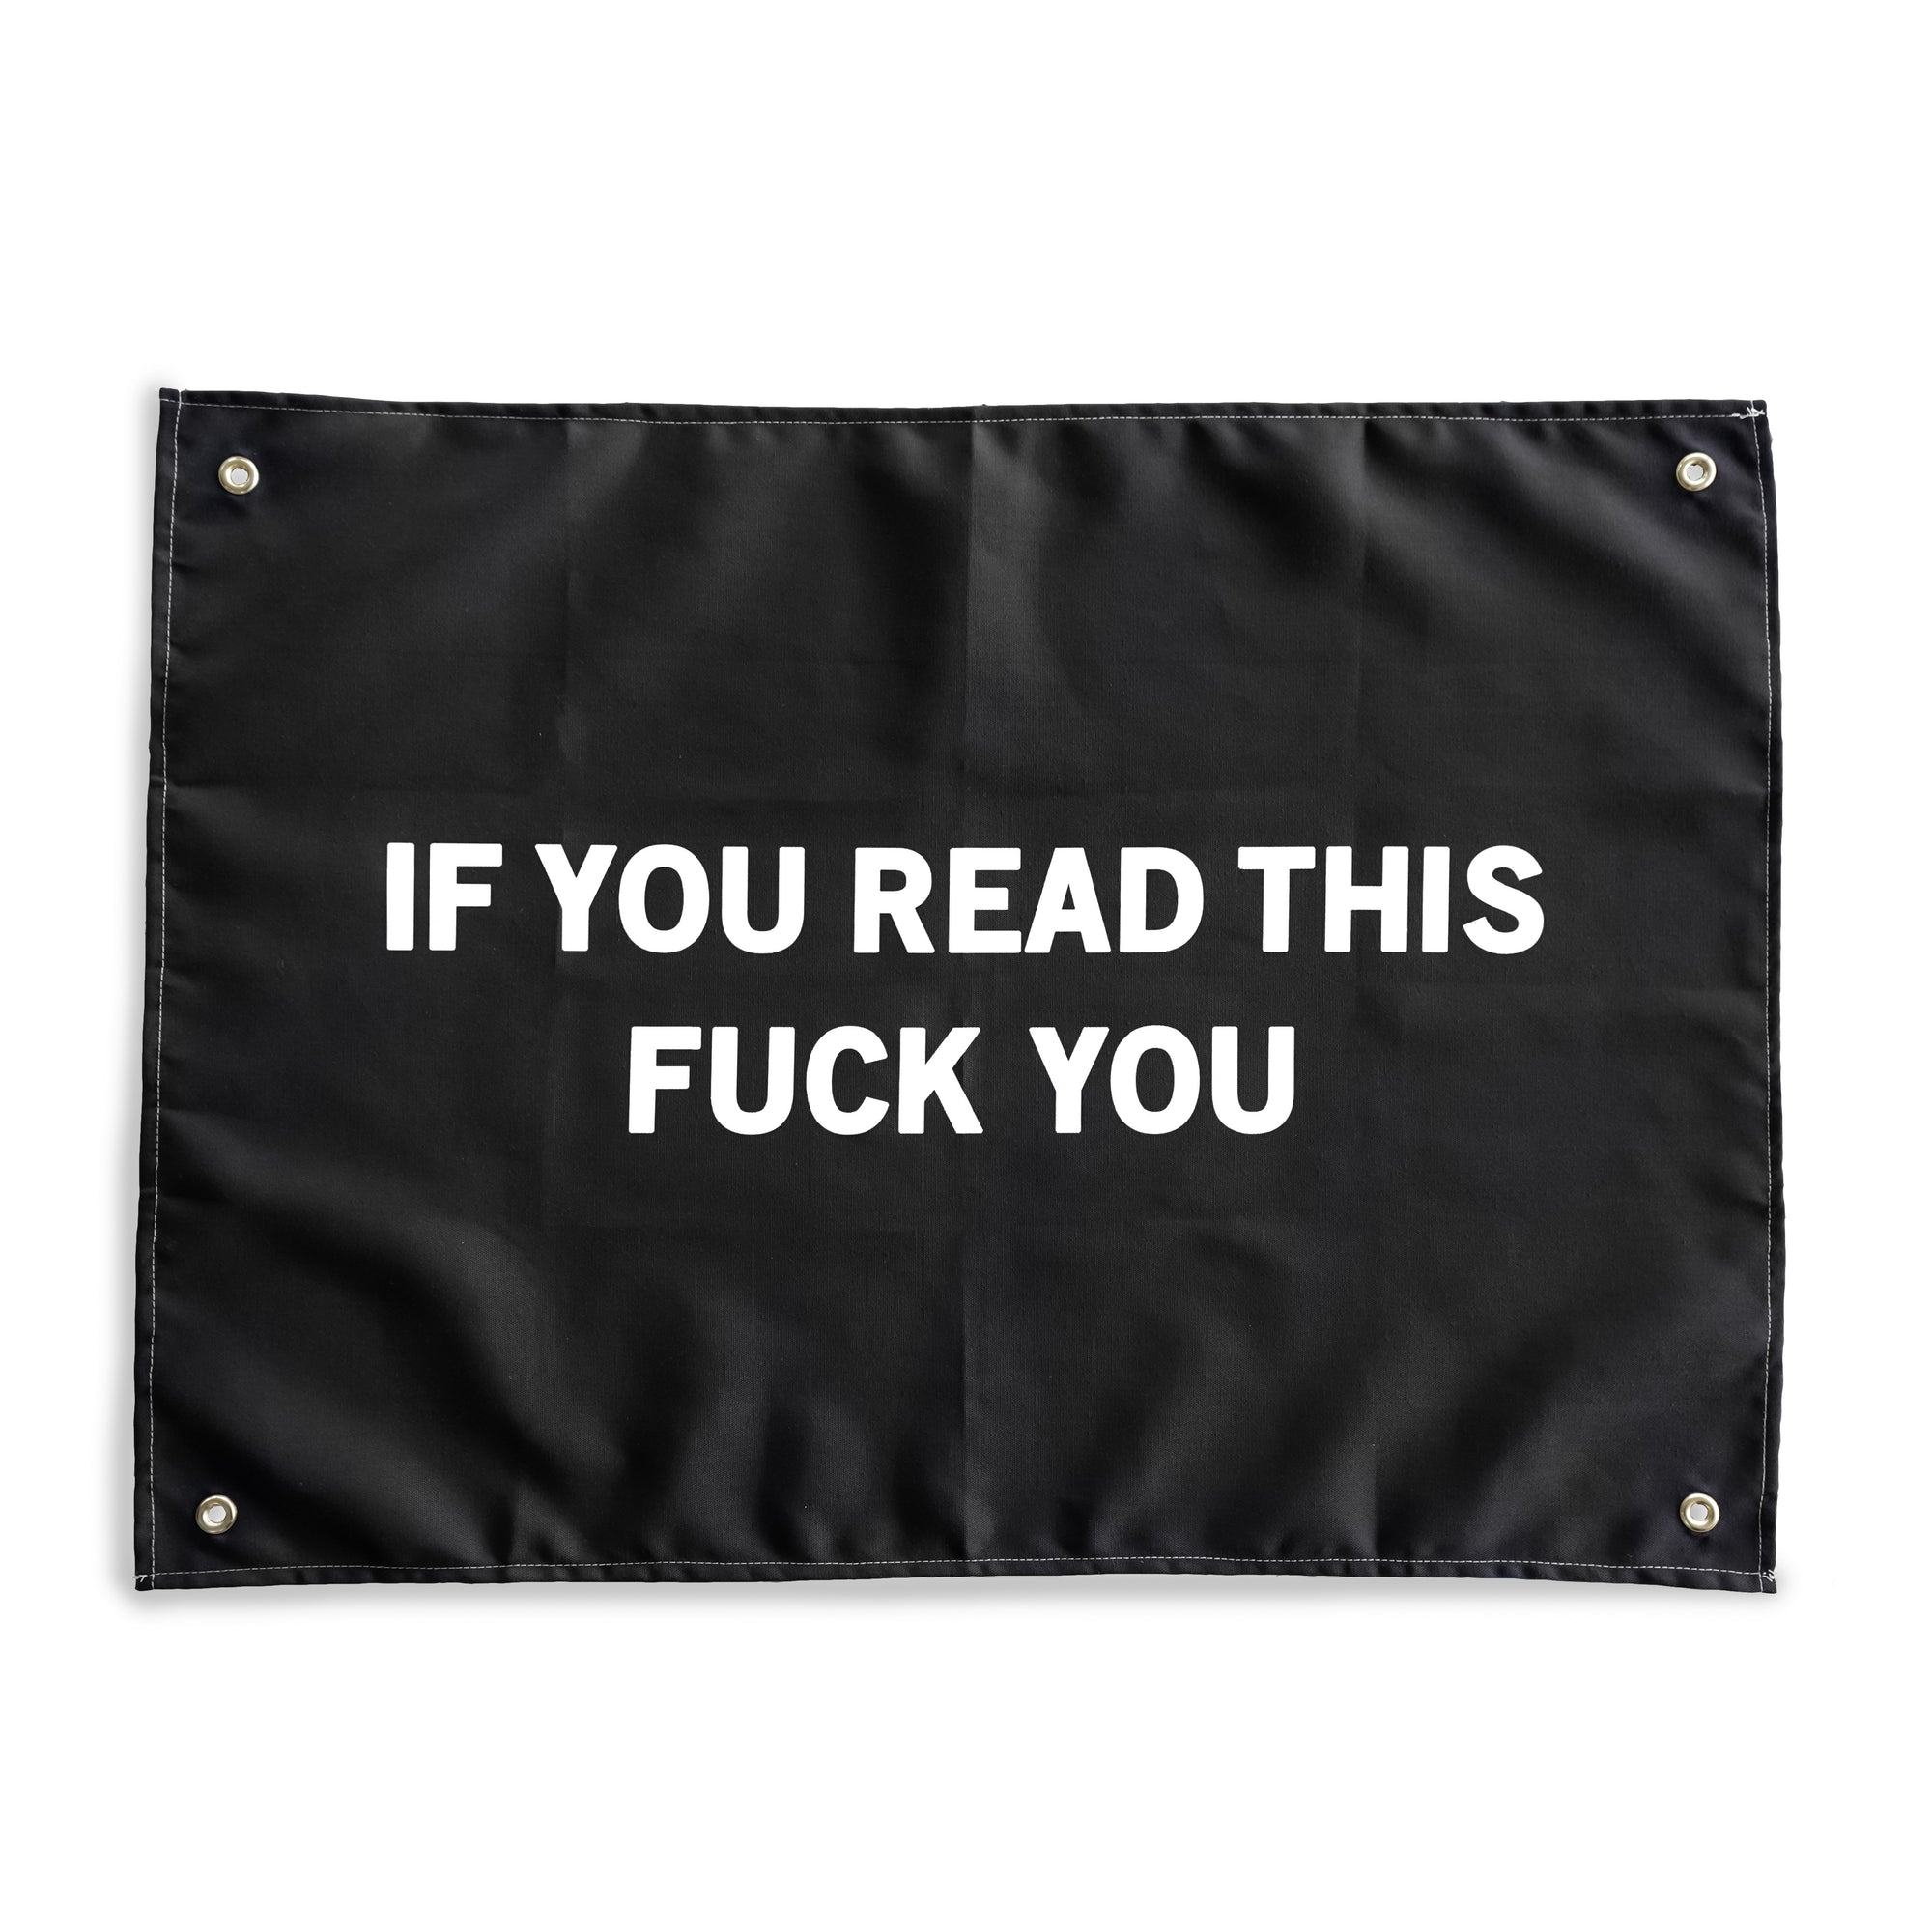 The "Read More" Wall tapestry by No Fun®.  Tapestry is black, and features the phrase "IF YOU READ THIS FUCK YOU" in large white letters.  There is 1 brass grommet in each corner of the tapestry.